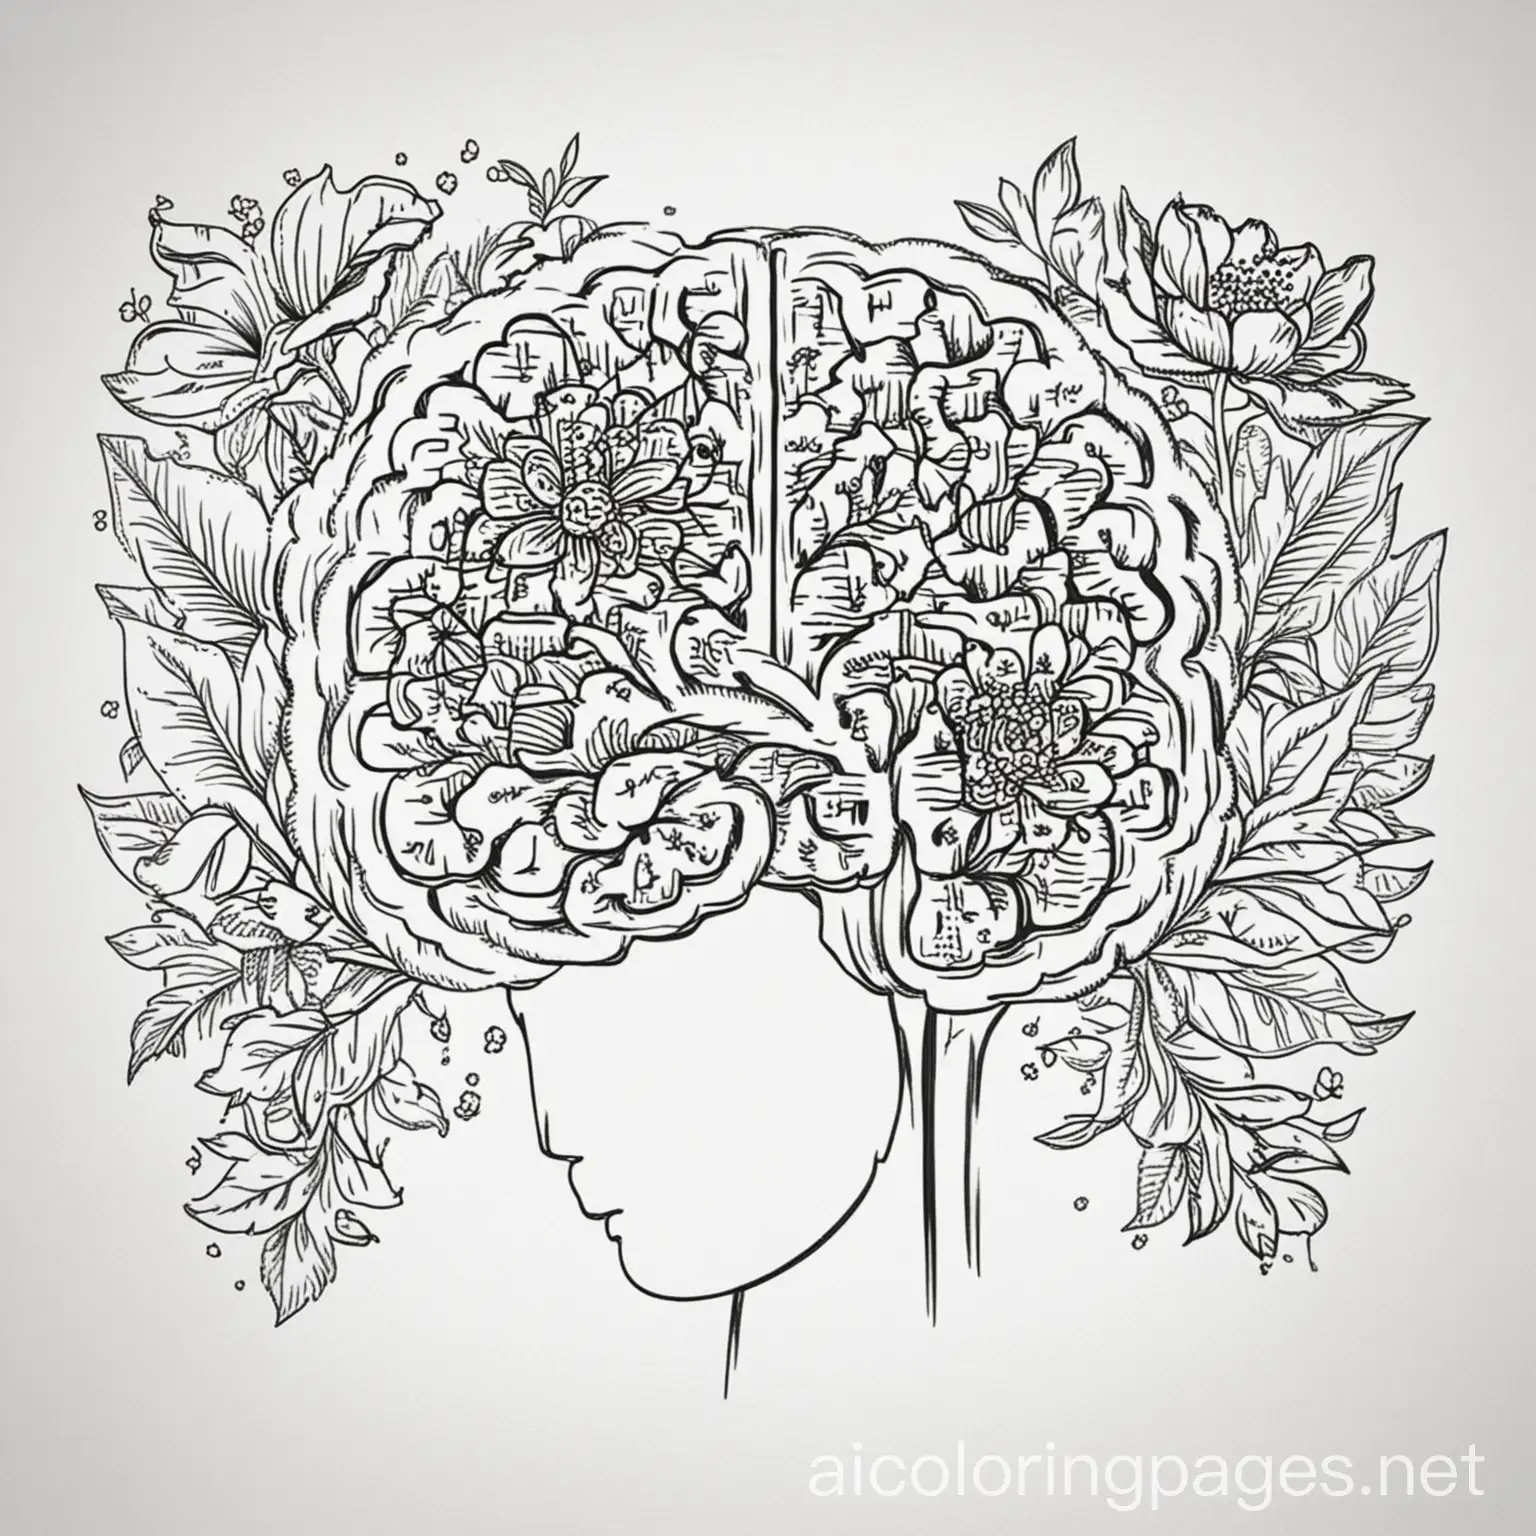 brain with flowers, Coloring Page, black and white, line art, white background, Simplicity, Ample White Space. The background of the coloring page is plain white to make it easy for young children to color within the lines. The outlines of all the subjects are easy to distinguish, making it simple for kids to color without too much difficulty